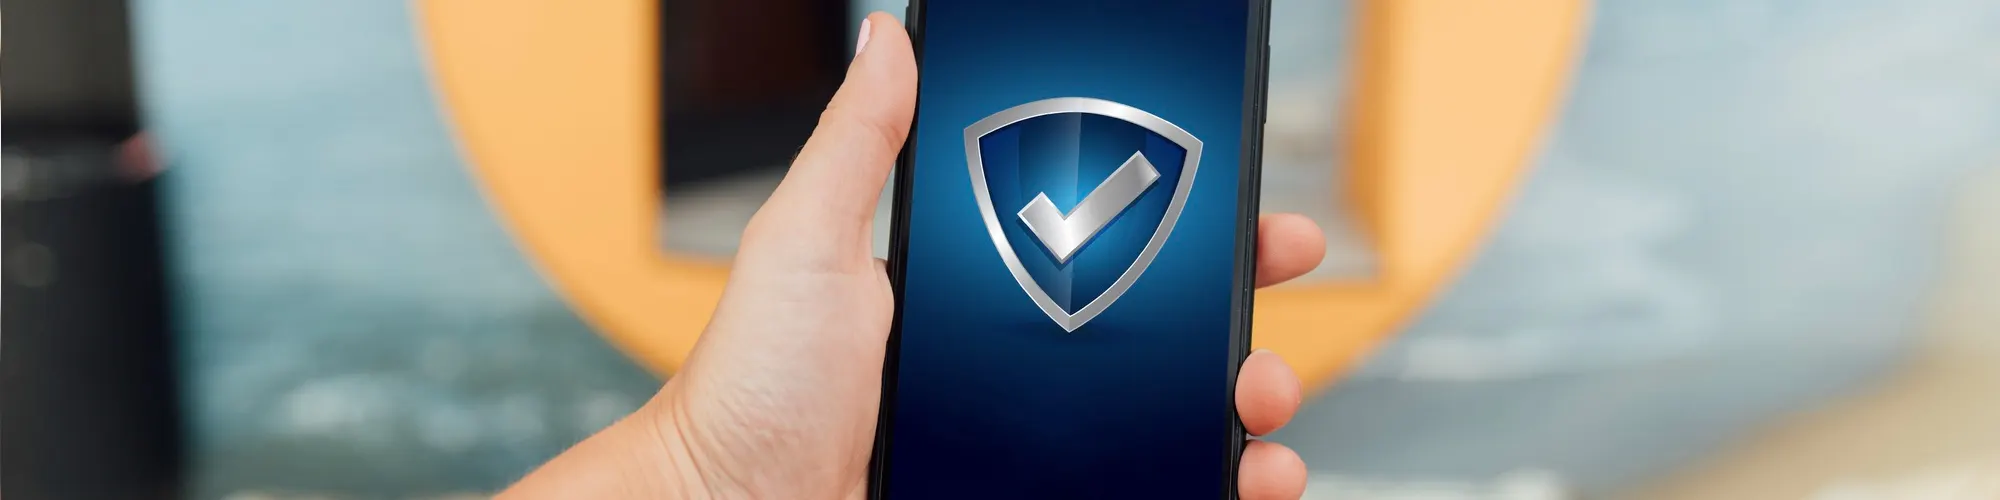 Mobile Security 101: Essential Tips and Tricks